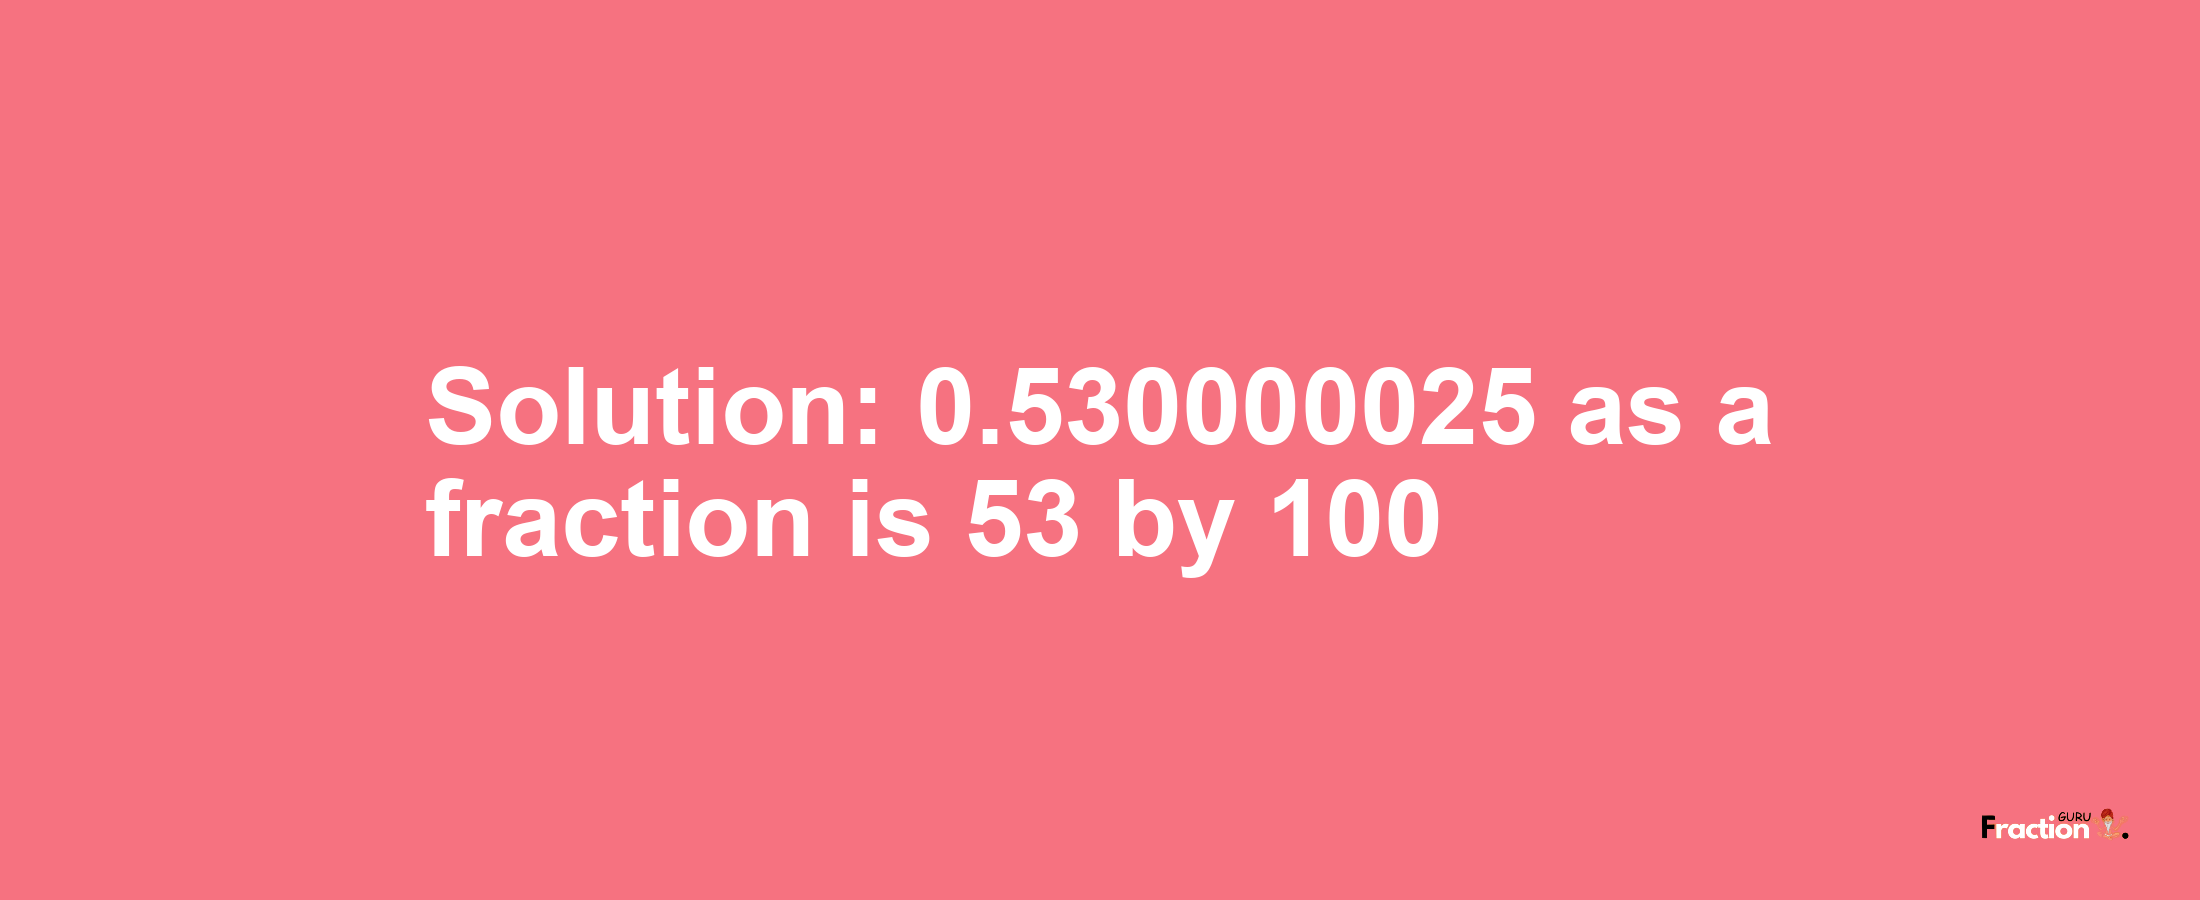 Solution:0.530000025 as a fraction is 53/100